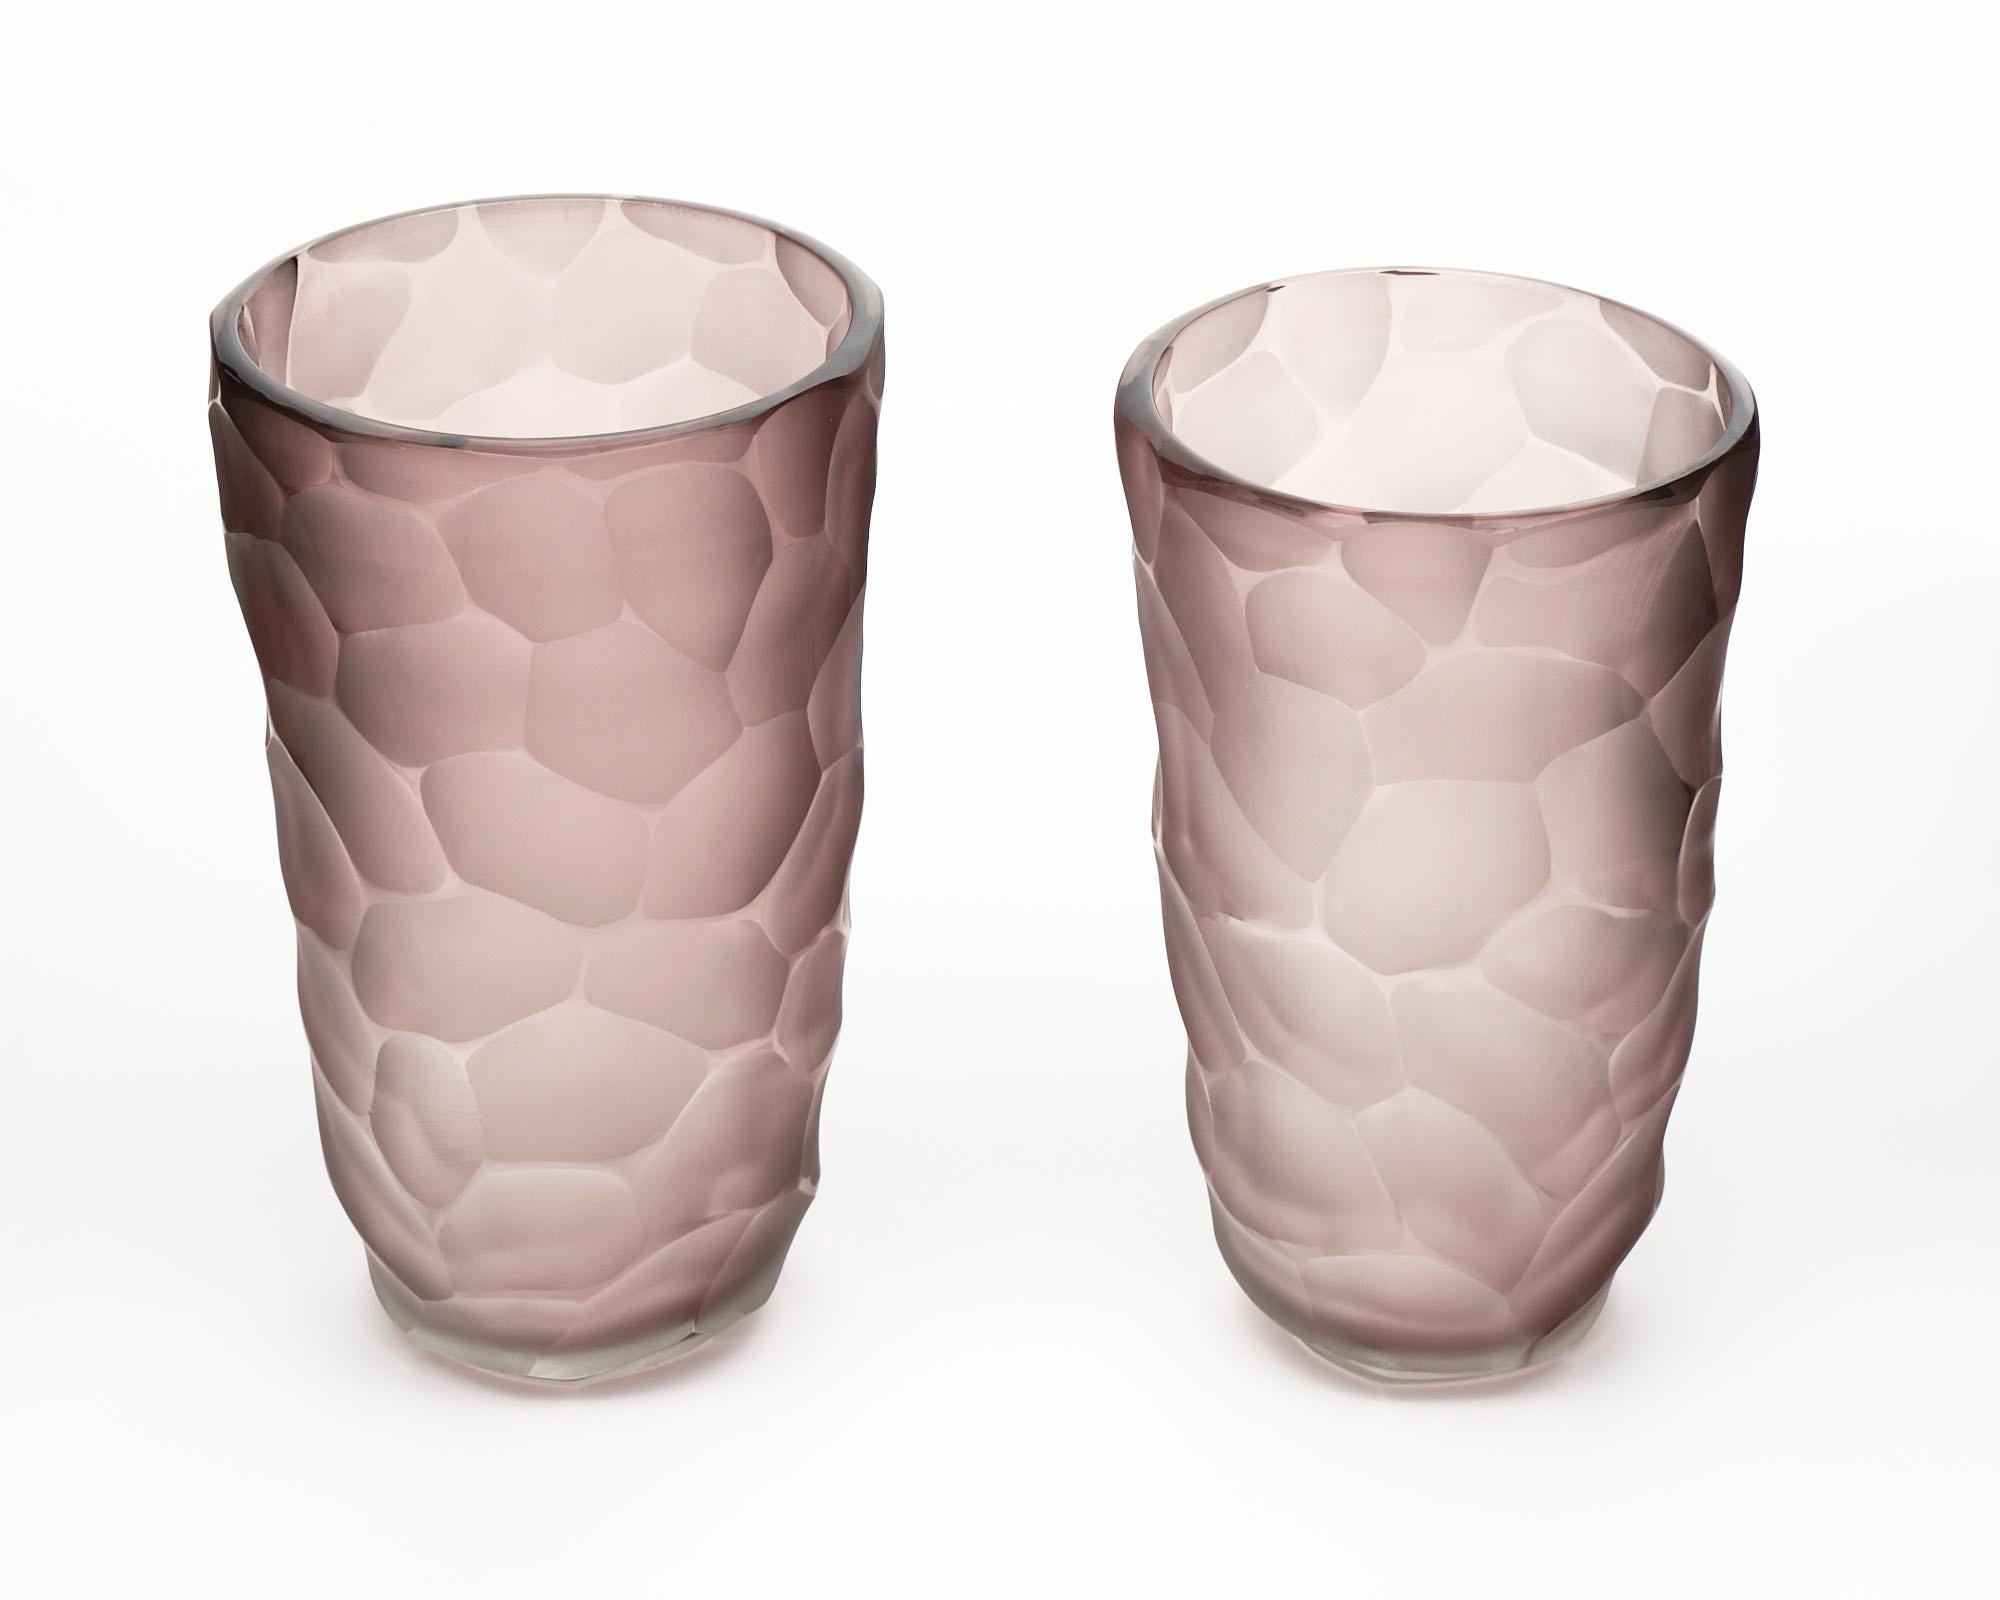 A pair of vases, amethyst color, from the Island of Murano, in the Manner of Carlo Scarpa. The measurements listed are for the larger vase, the measurements for the smaller vase are listed below. 

Diameter: 9.62”

Height: 15.25”.